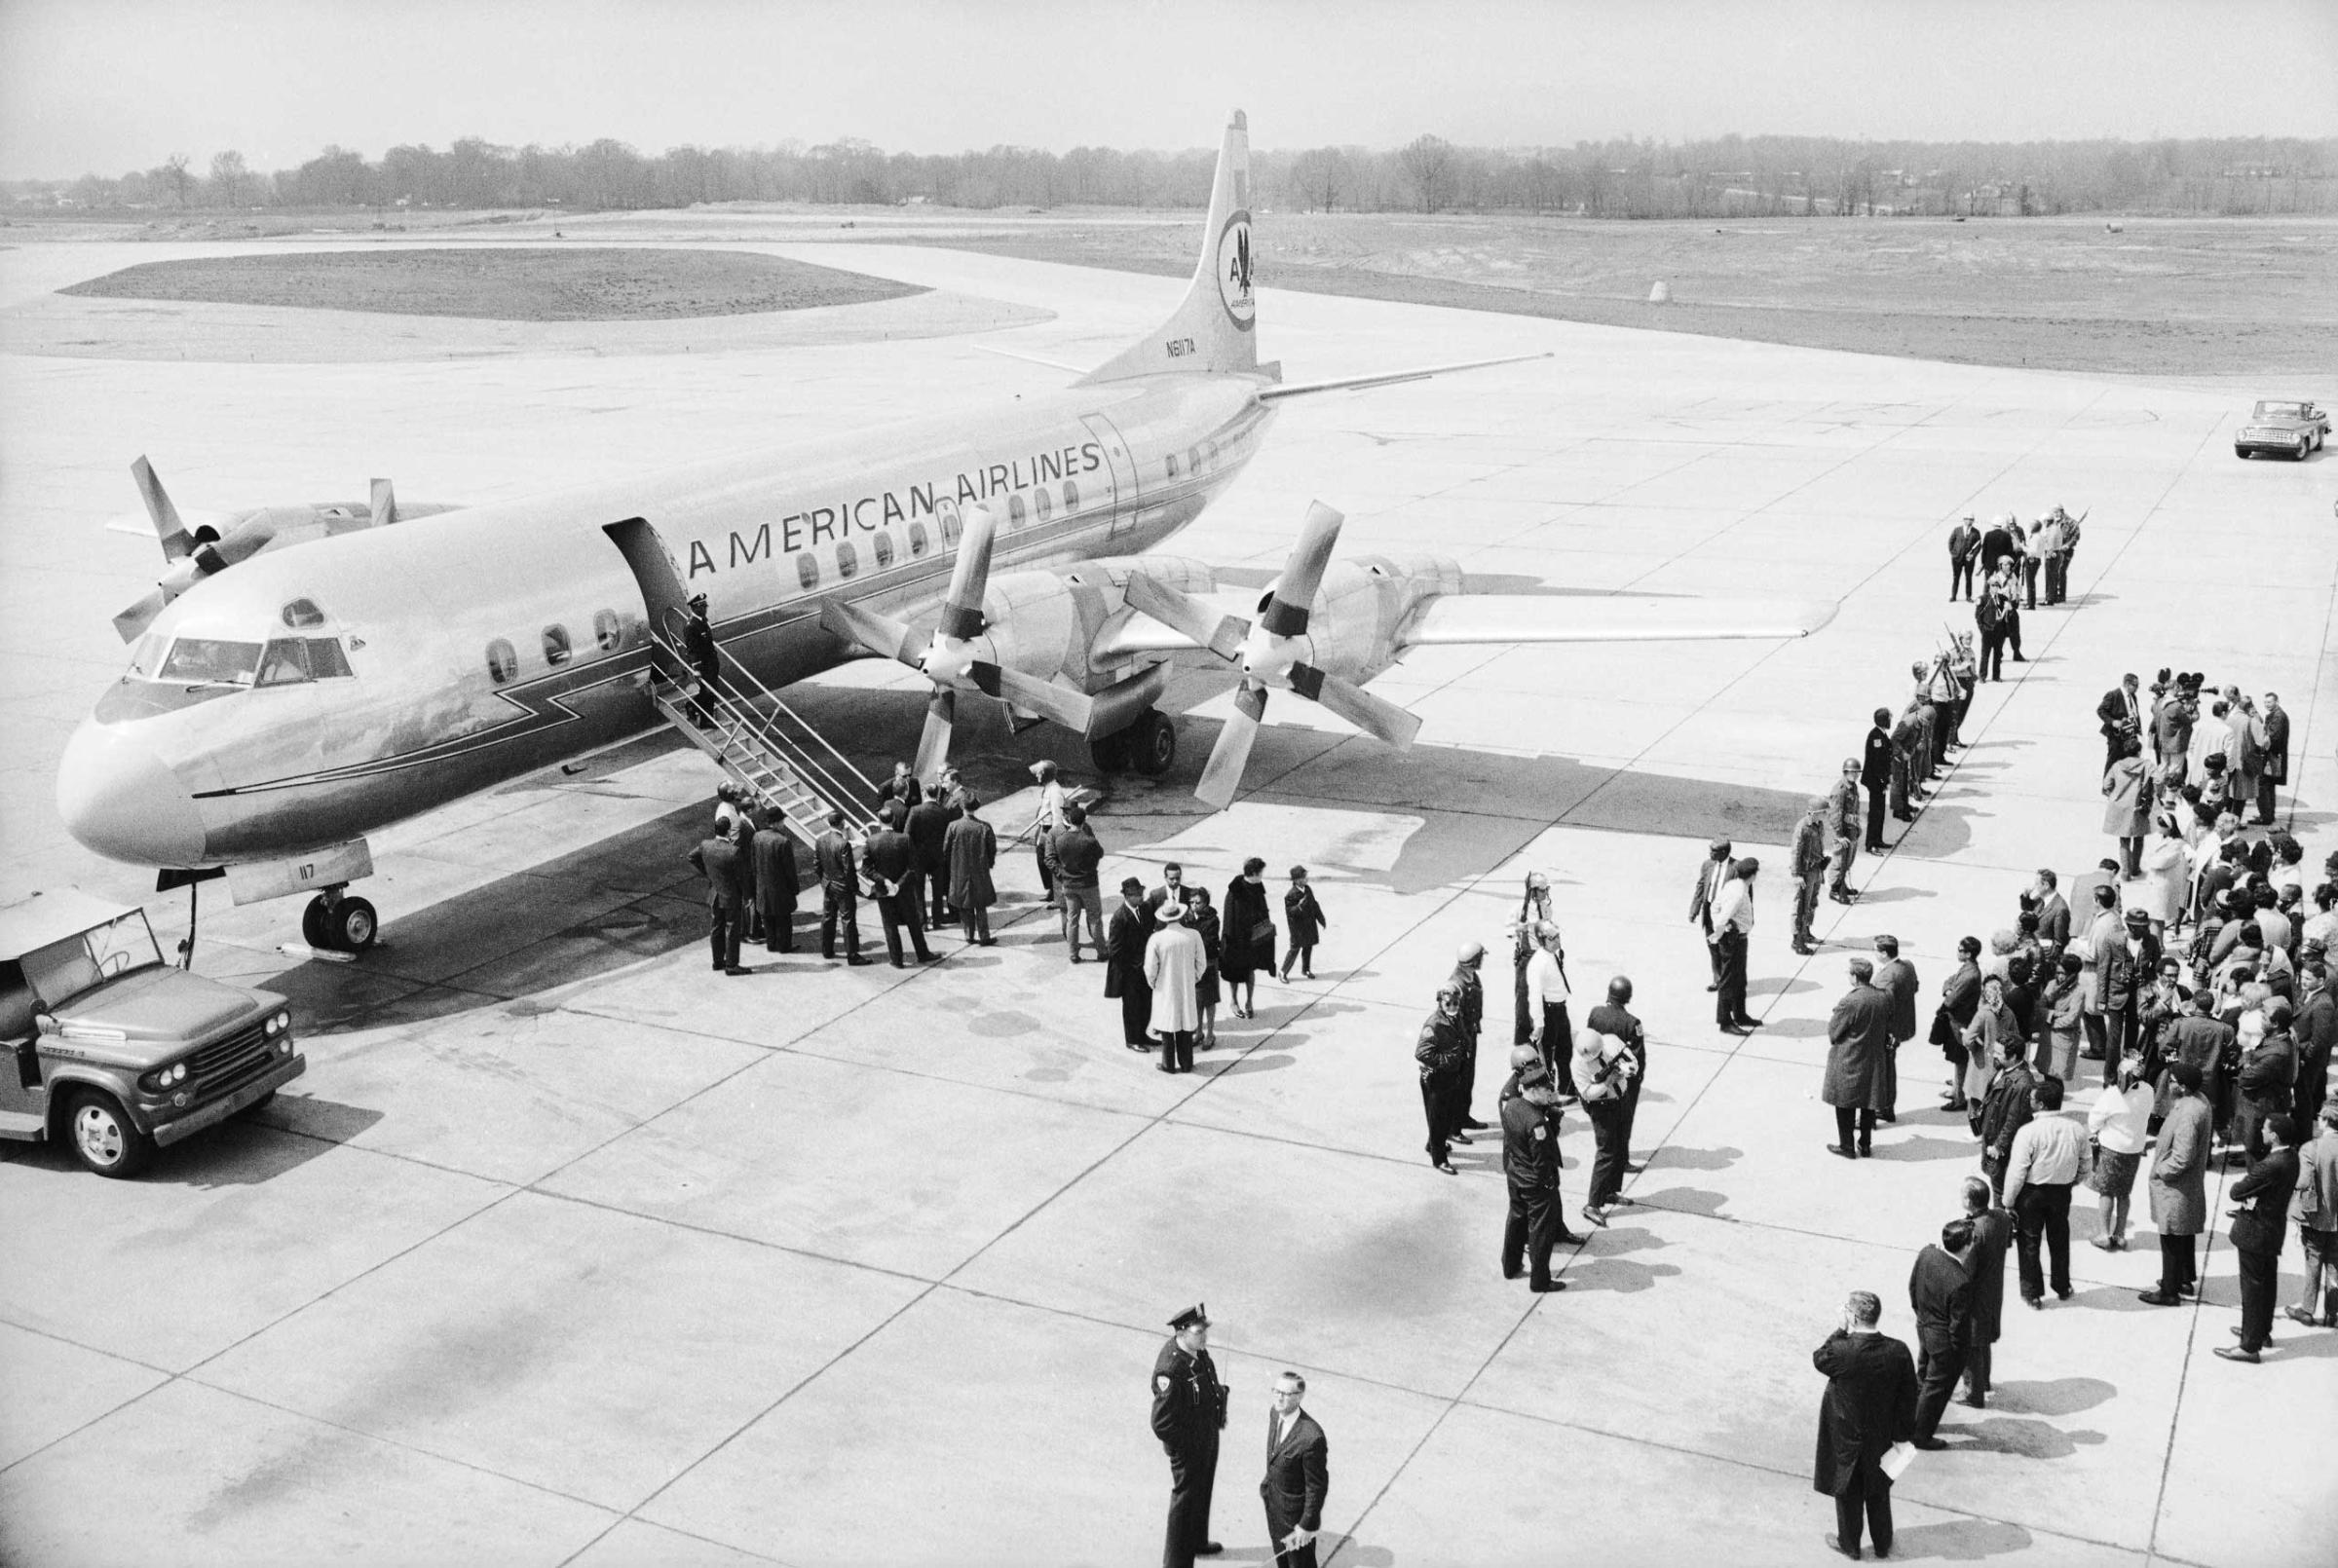 An airplane dispatched by the U.S. government to retrieve Dr. King's body and return it to Atlanta, Ga., waits on the tarmac in Memphis, Tenn., the day after MLK's assassination. "Here we were, two white guys in the Deep South right after the murder of th